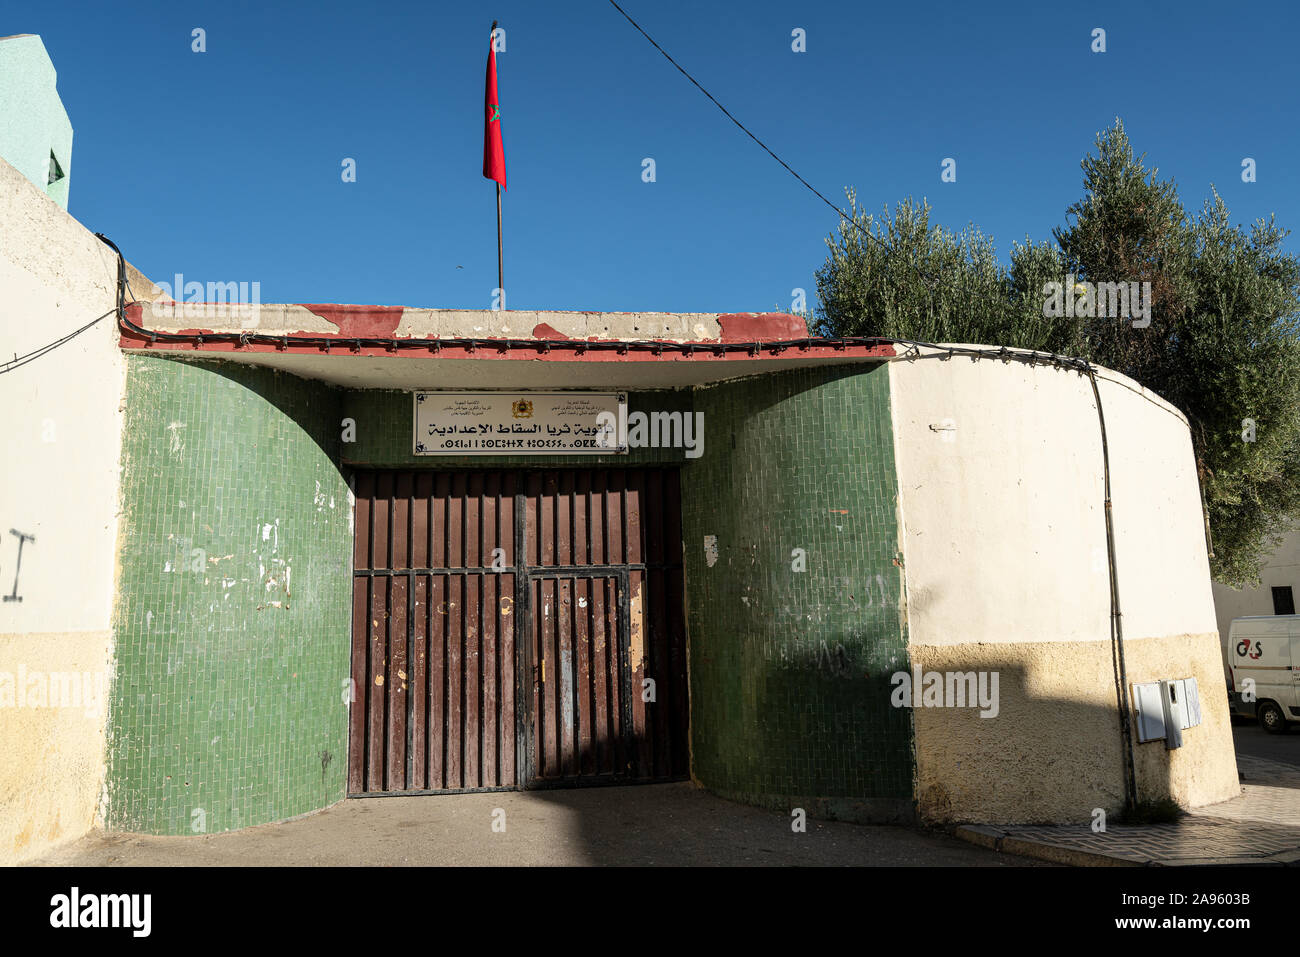 Fez, Morocco. November 9, 2019. A   Local government office building in the city center Stock Photo